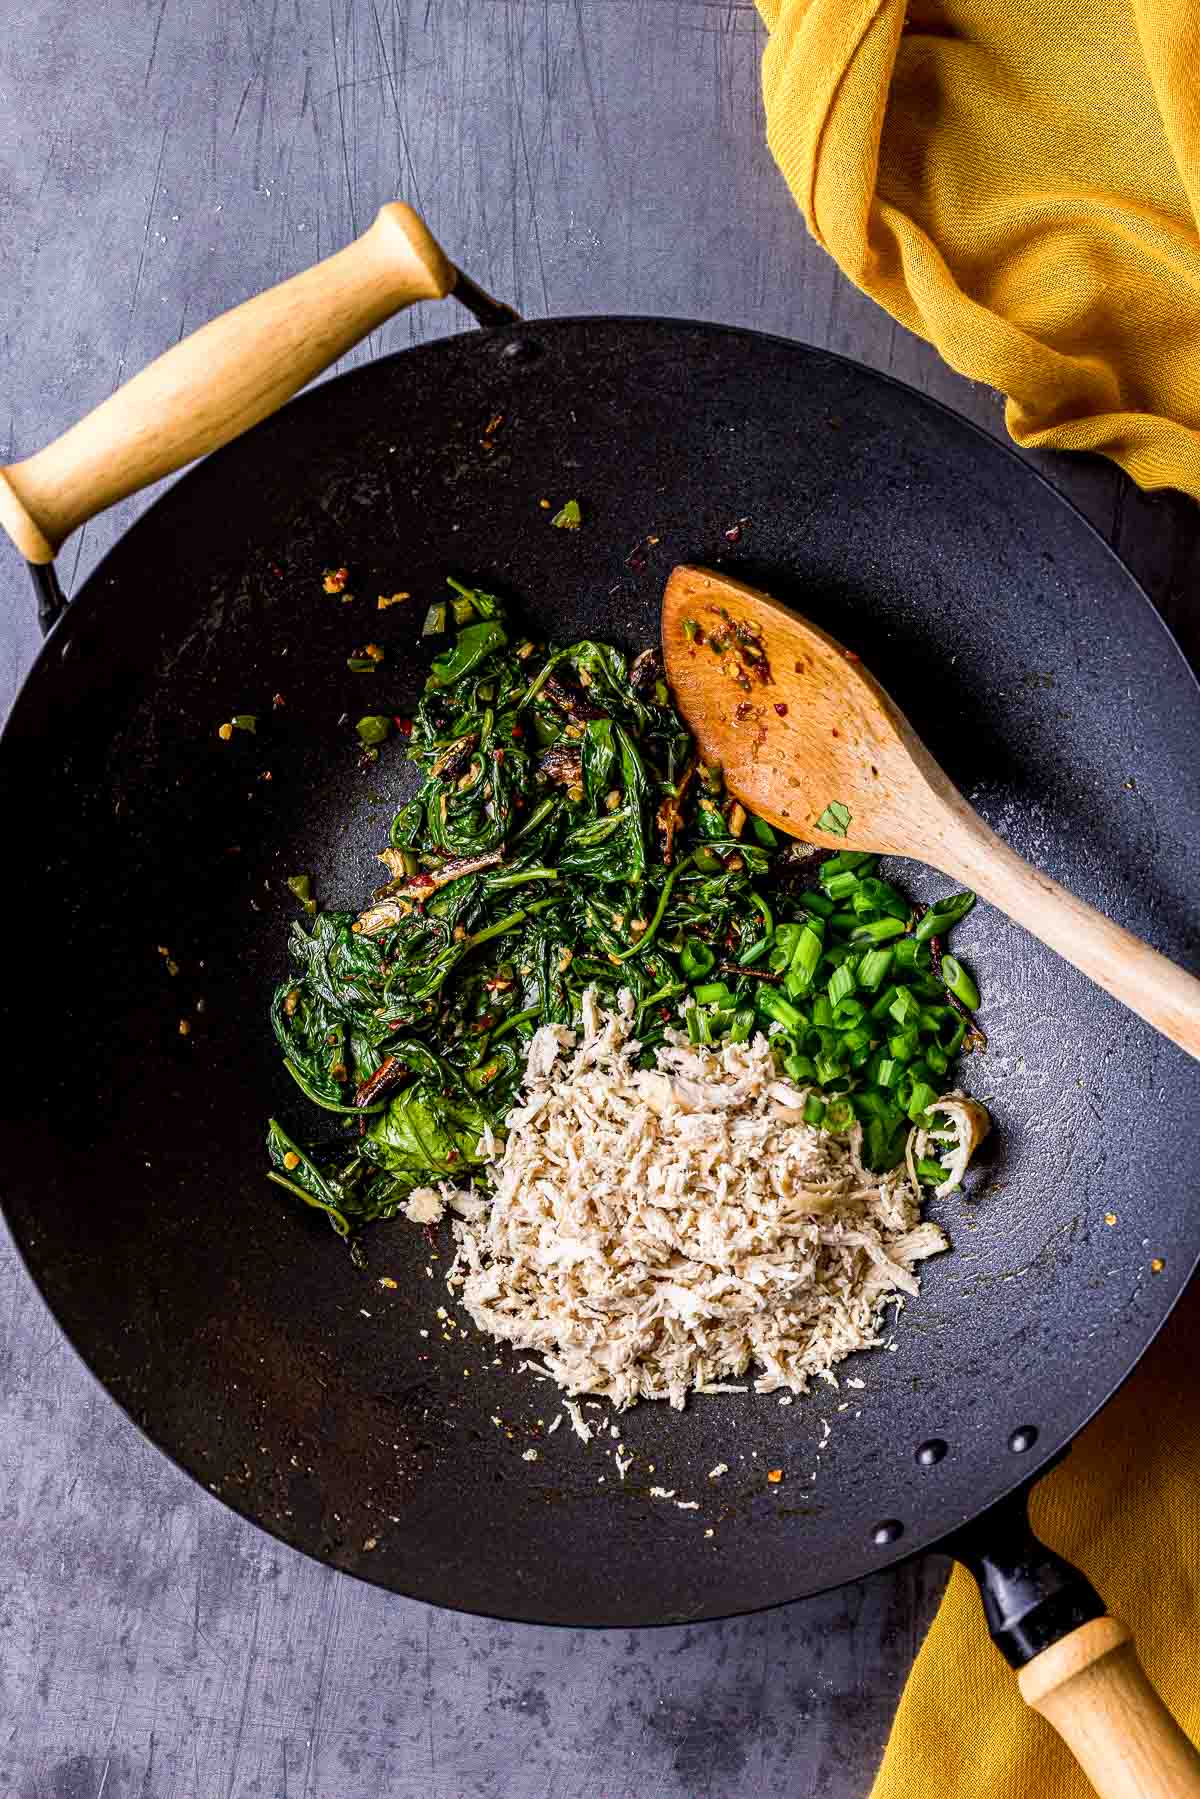 greens and shredded chicken cooking in a wok